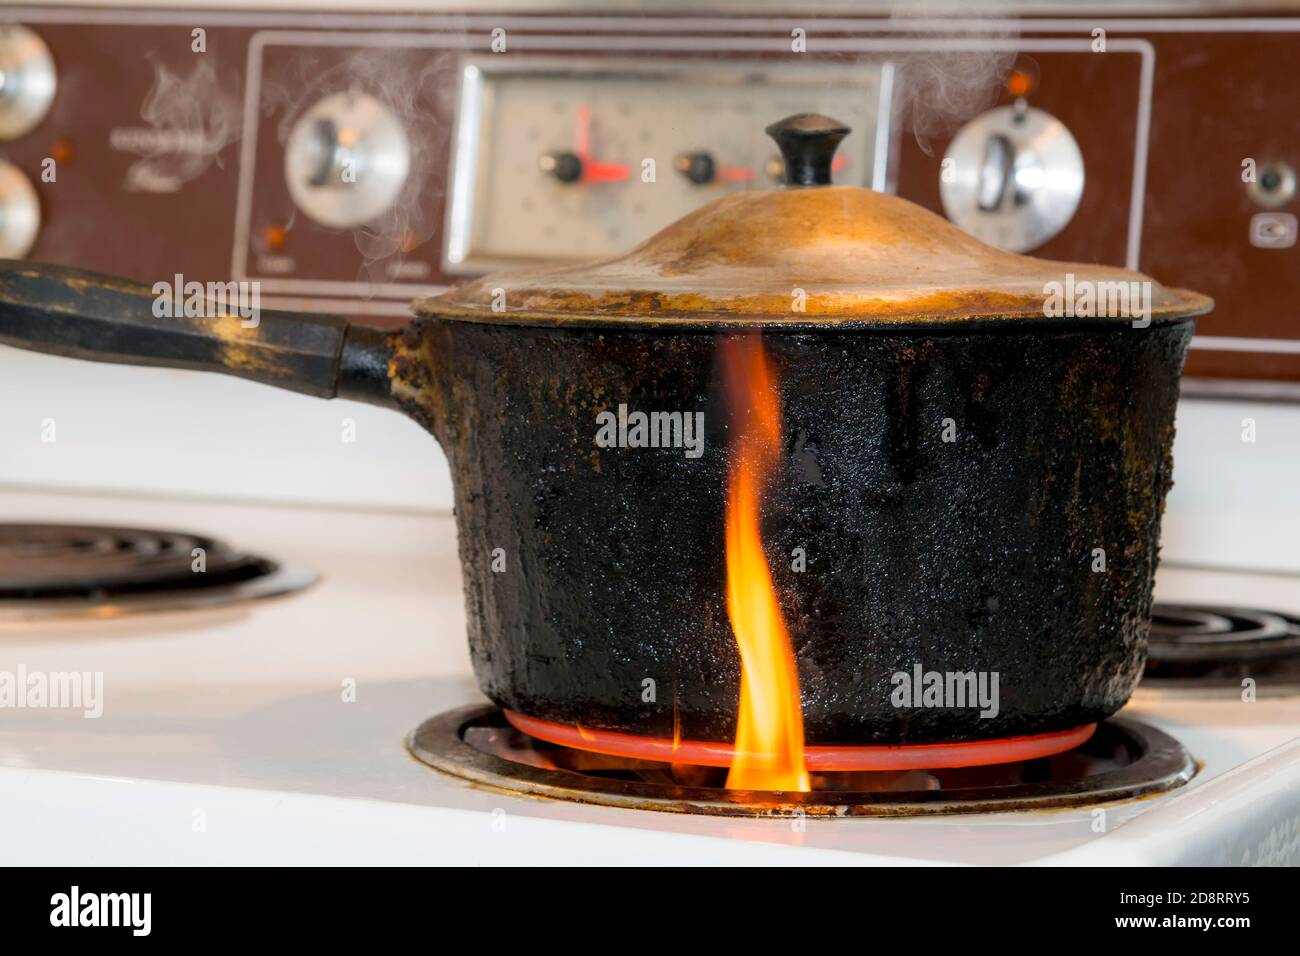 https://c8.alamy.com/comp/2D8RRY5/an-old-covered-charred-blackened-pot-burning-on-a-burner-on-an-electric-stove-the-small-flame-is-on-the-outside-of-the-pot-rising-from-the-burner-2D8RRY5.jpg